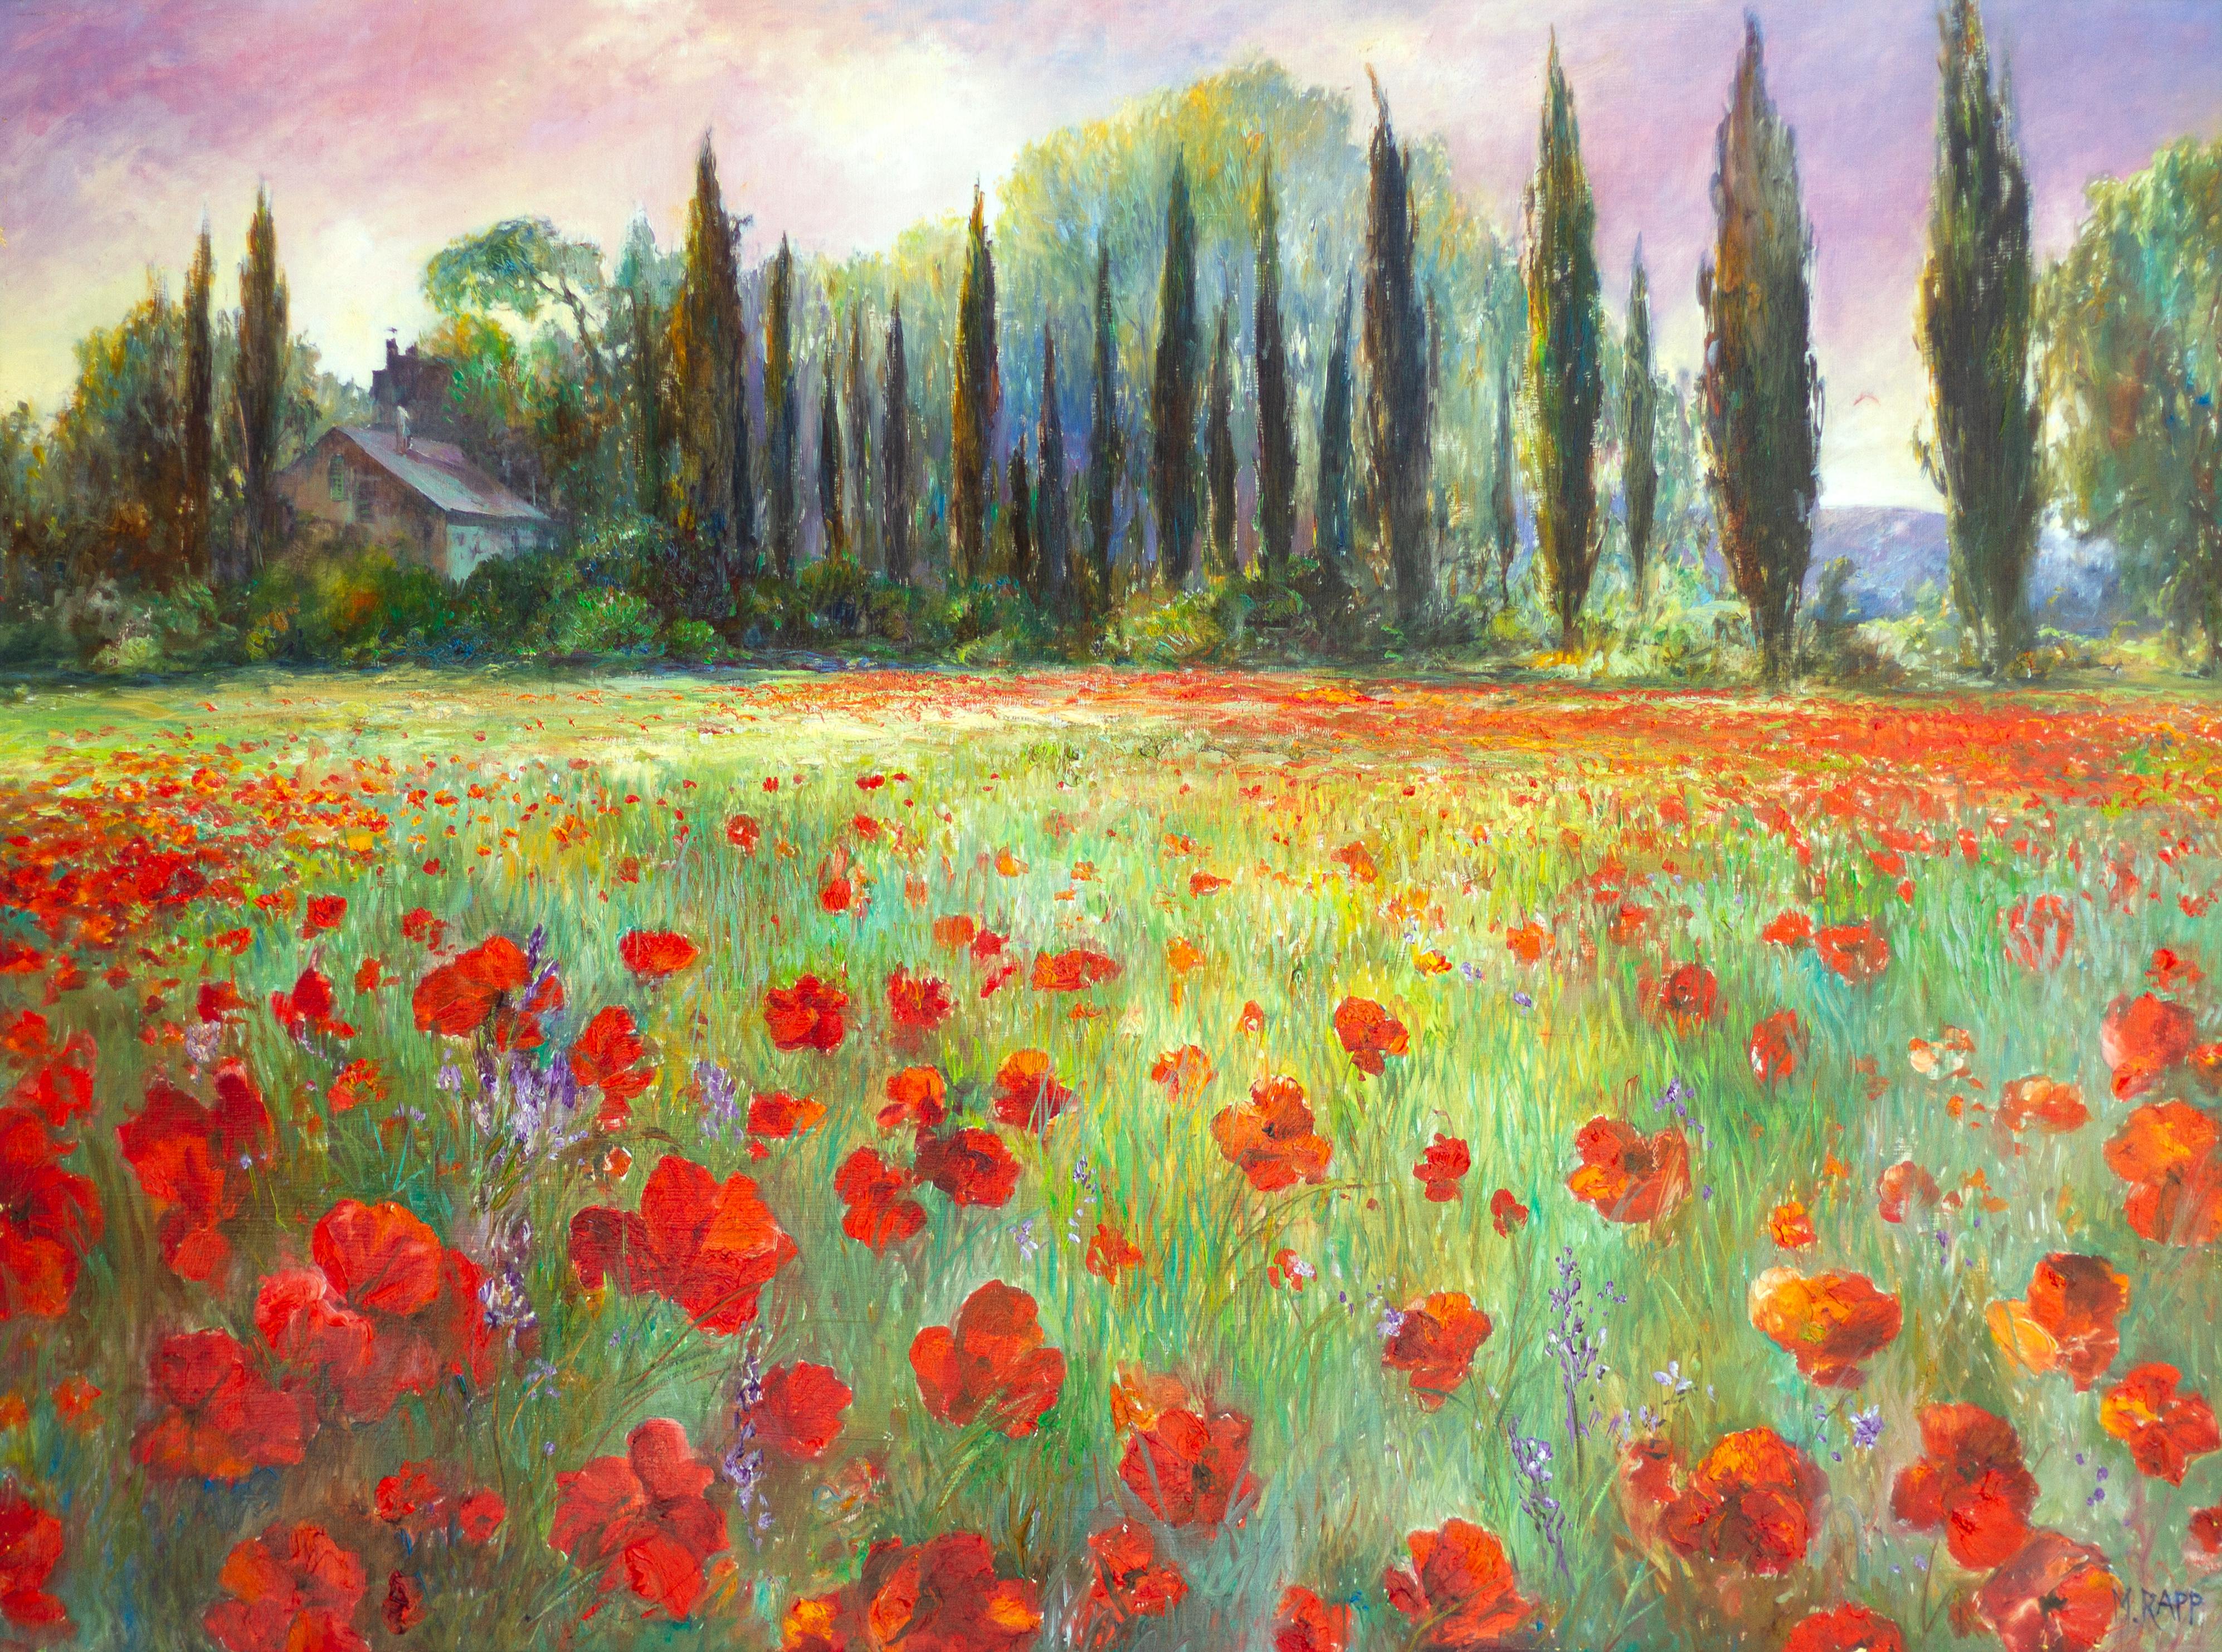 "Poppy Field" Evening Landscape with Red Poppies